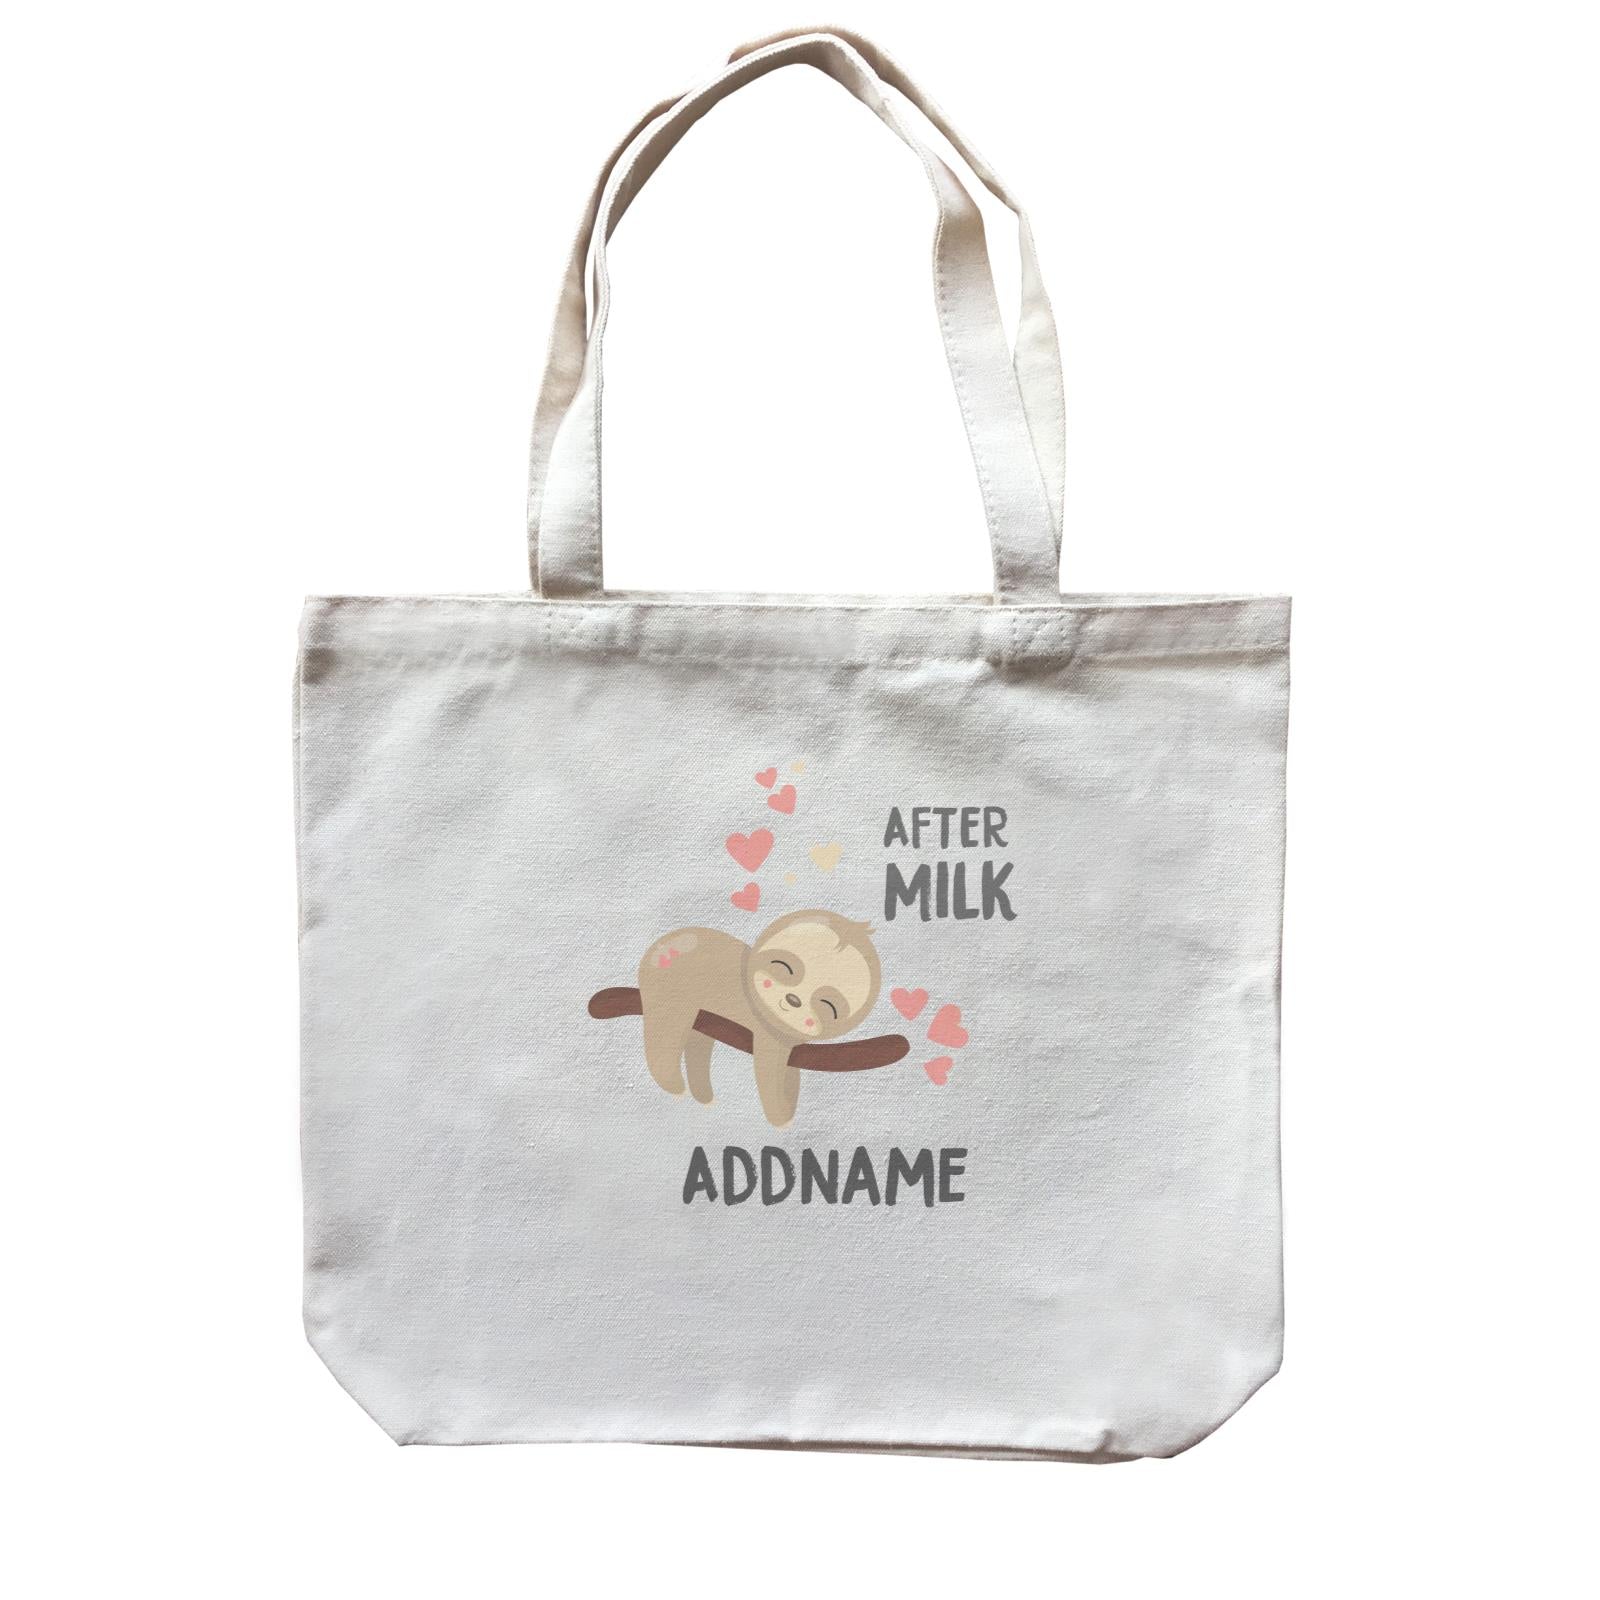 Cute Sloth After Milk Addname Canvas Bag